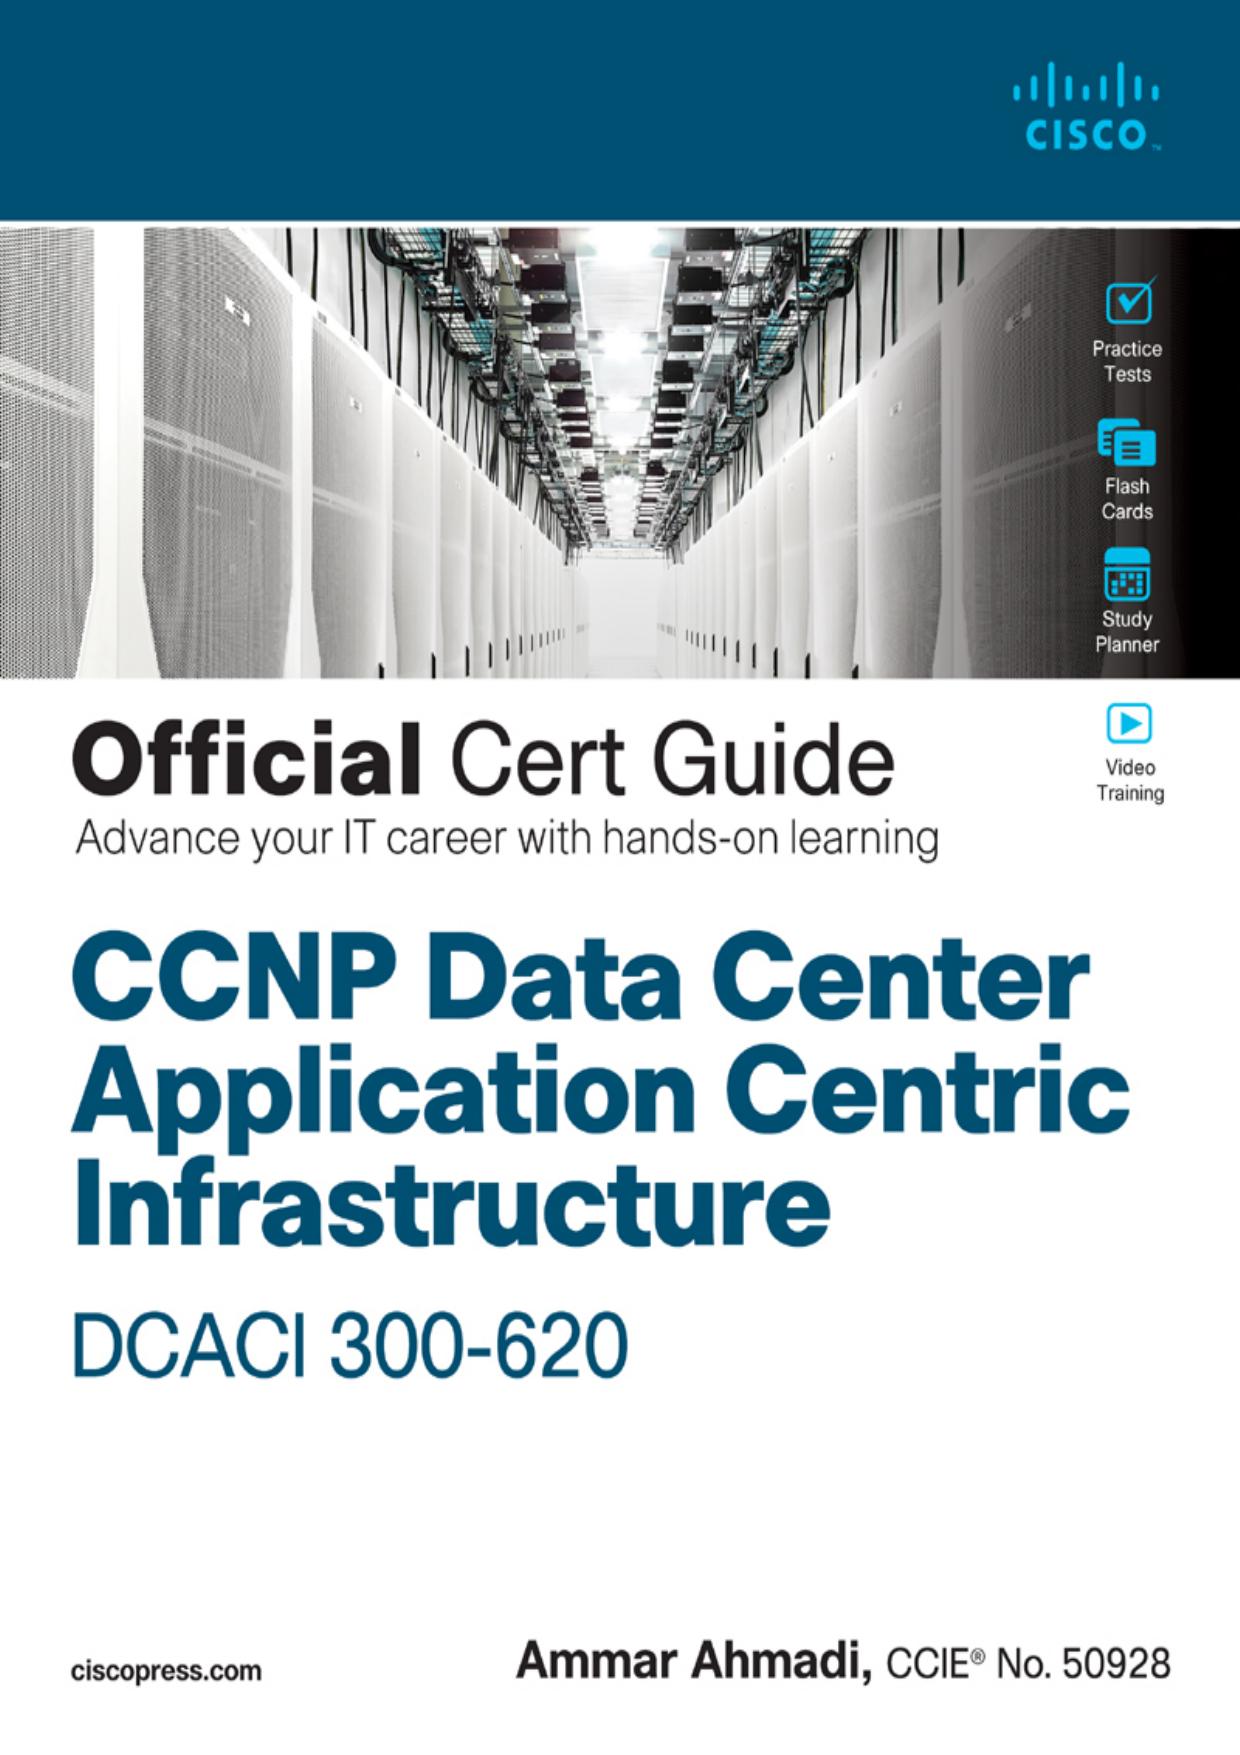 CCNP Data Center Application Centric Infrastructure 300-620 DCACI Official Cert Guide by Ammar Ahmadi